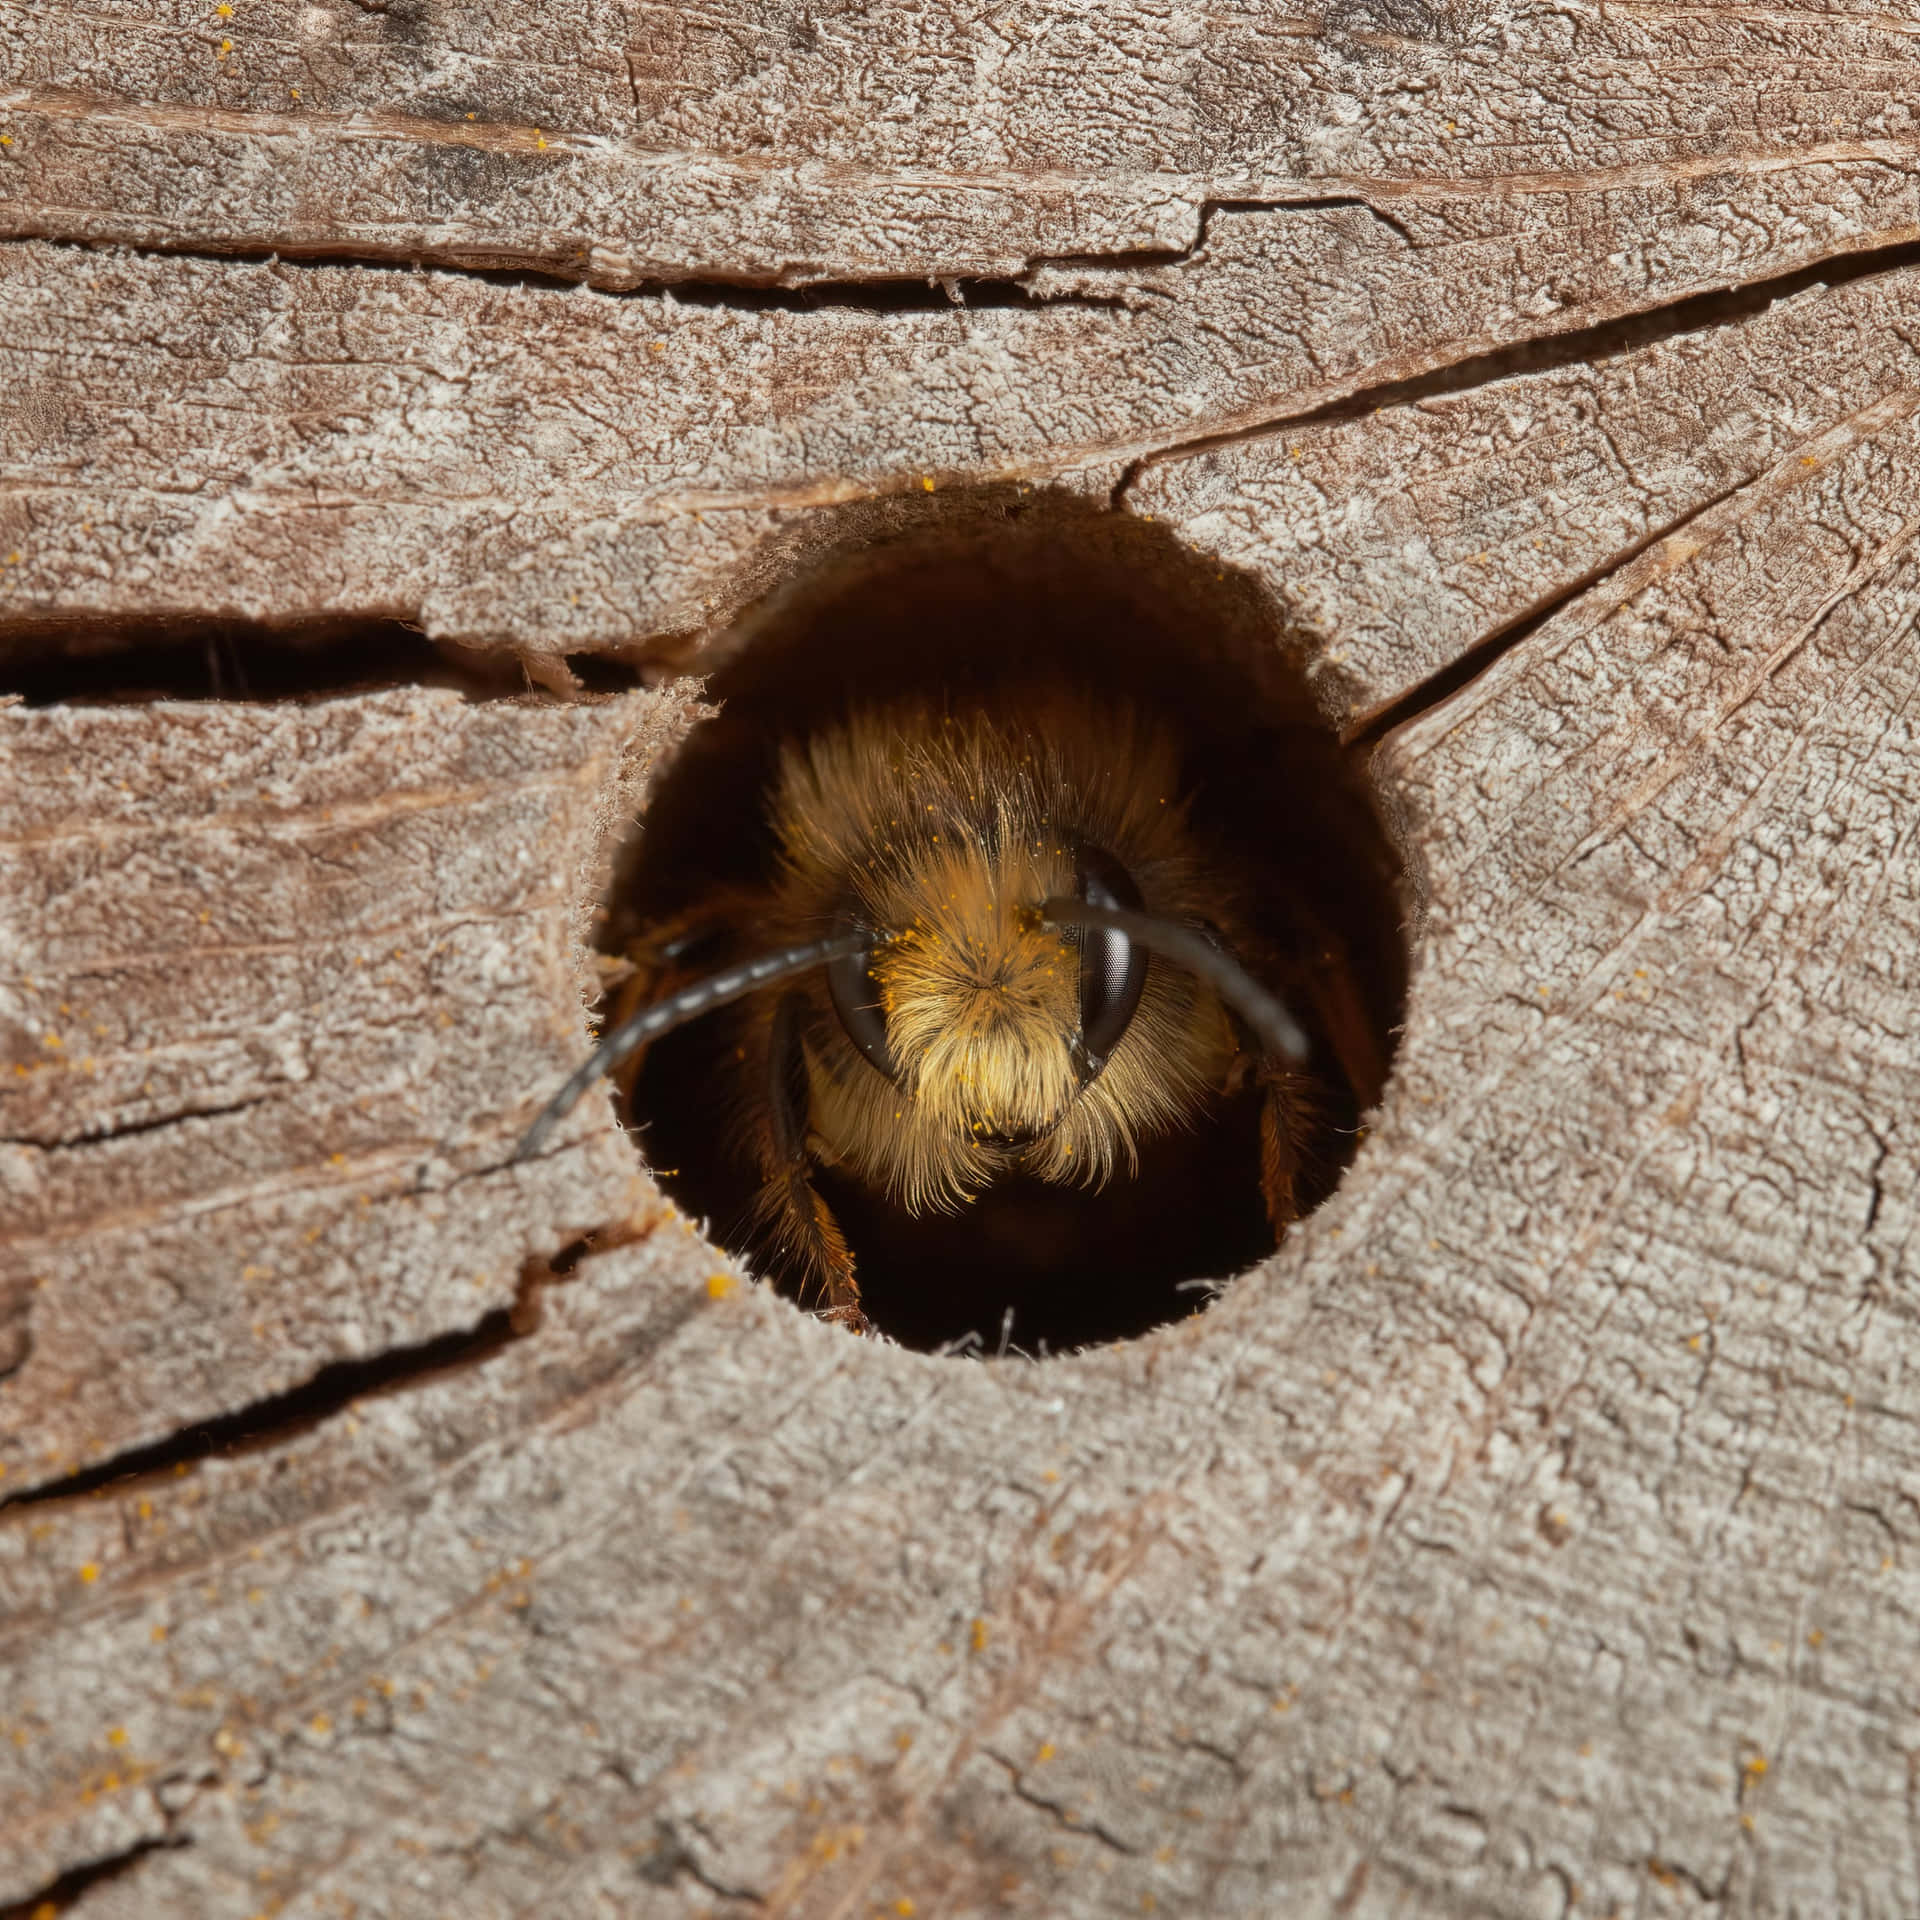 Solitary Beein Wooden Hole Wallpaper